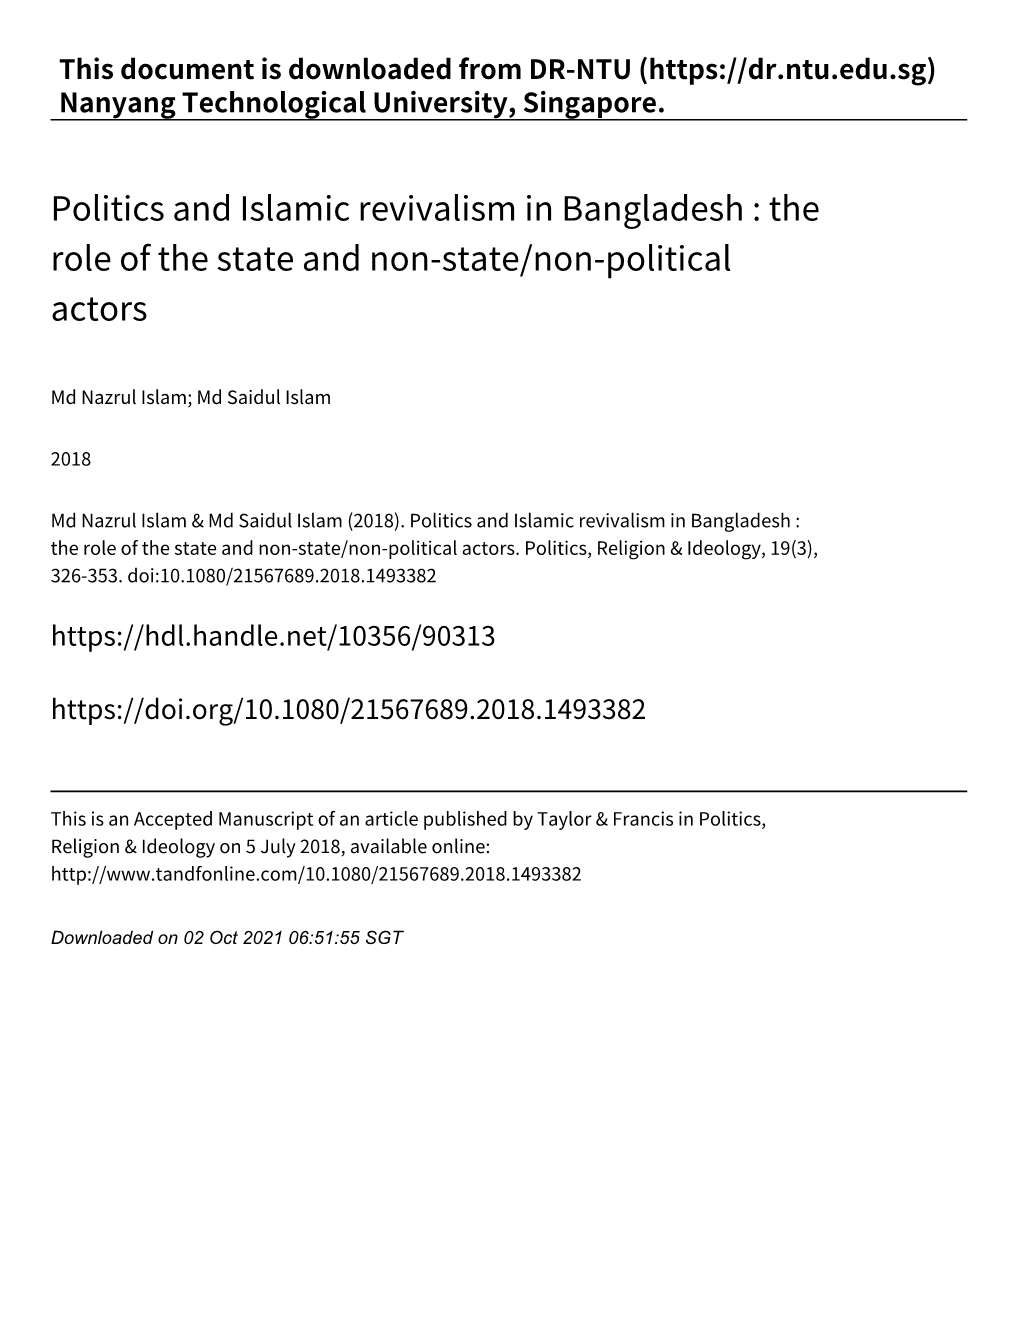 Politics and Islamic Revivalism in Bangladesh : the Role of the State and Non‑State/Non‑Political Actors